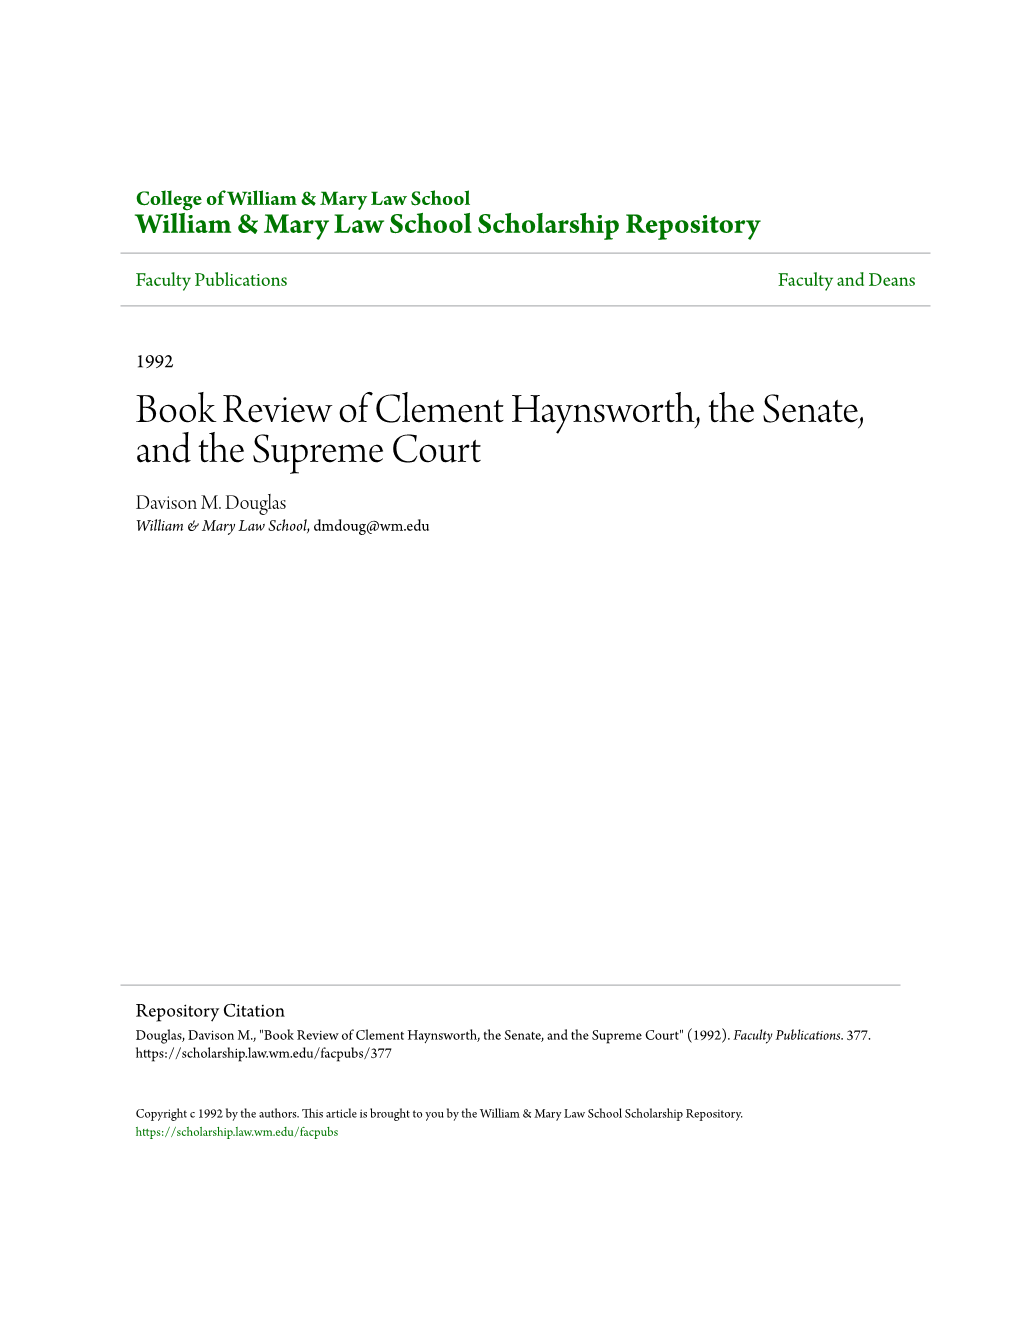 Book Review of Clement Haynsworth, the Senate, and the Supreme Court Davison M